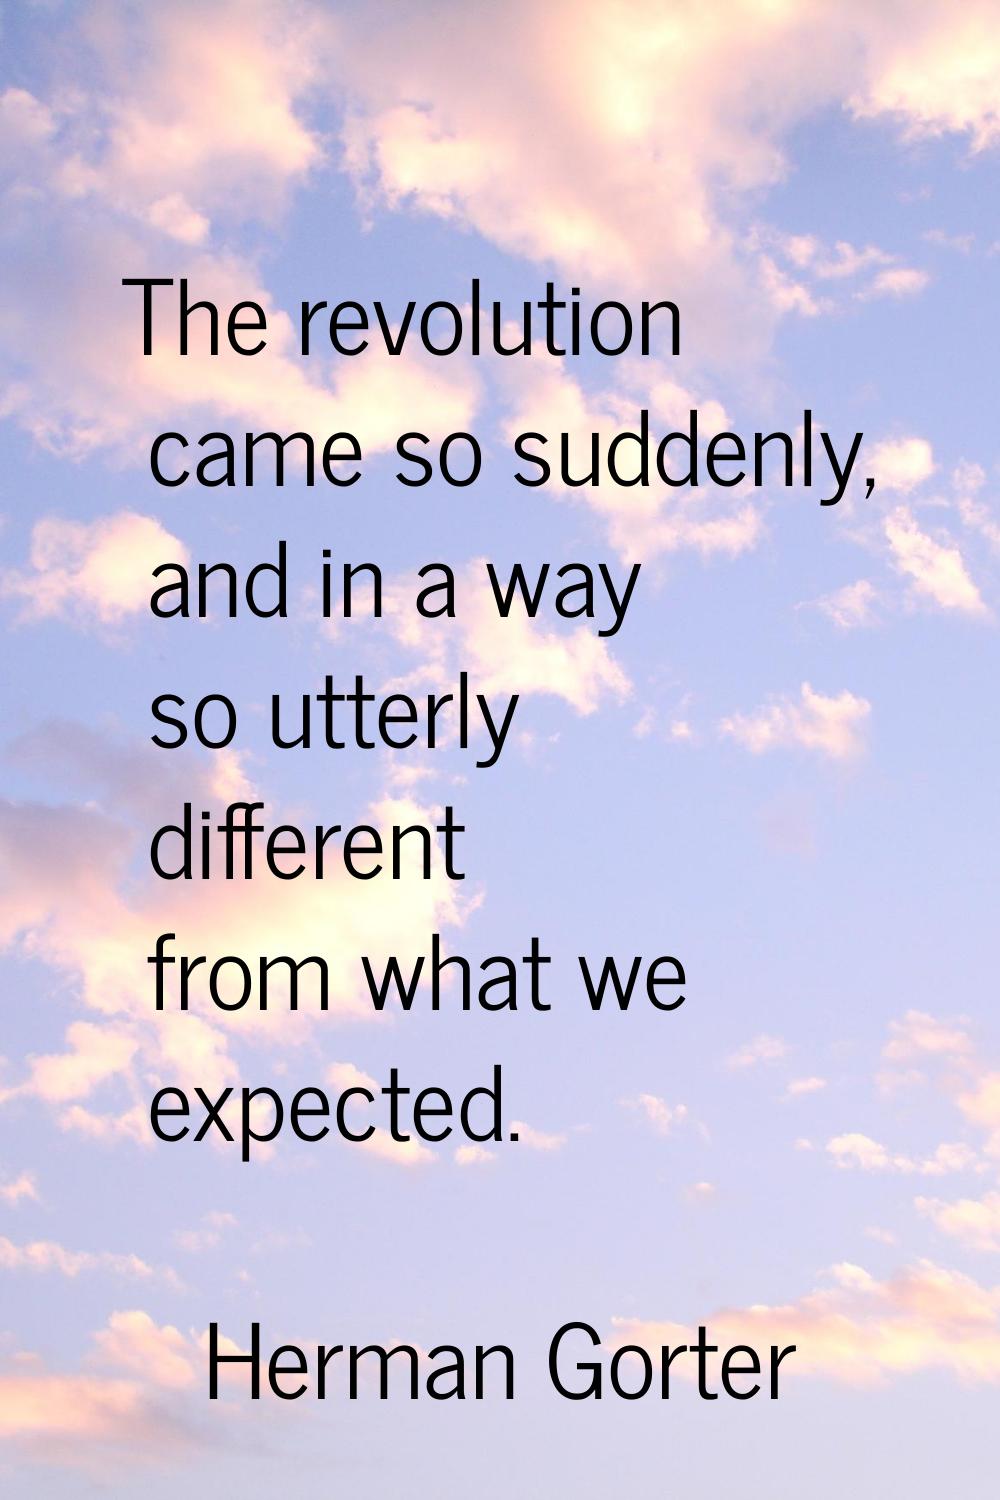 The revolution came so suddenly, and in a way so utterly different from what we expected.